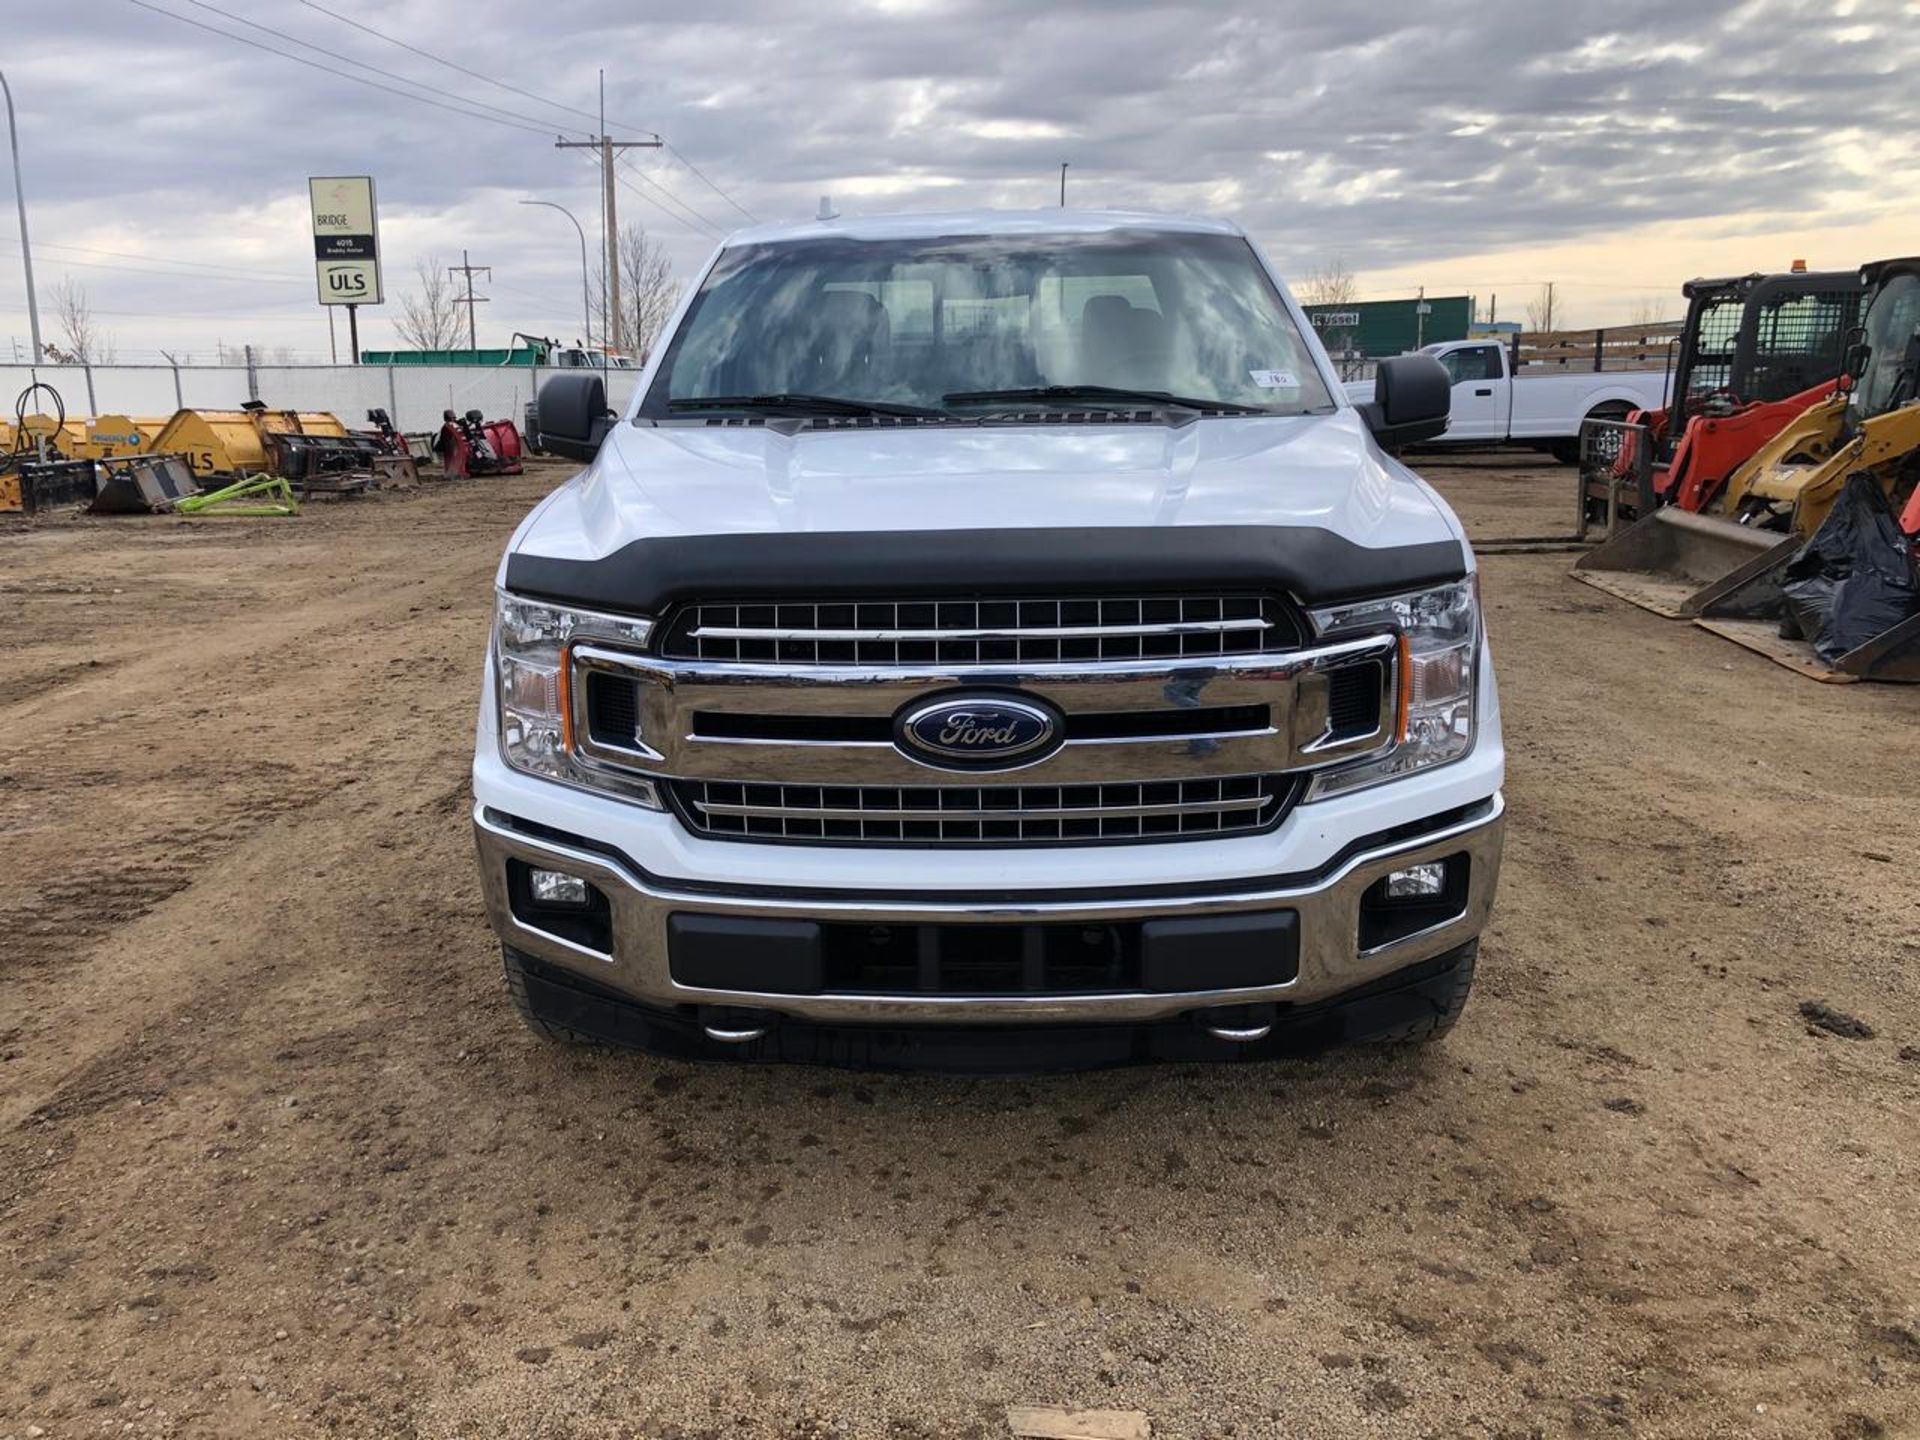 2018 Ford F150 Pick-up Truck - Image 2 of 13